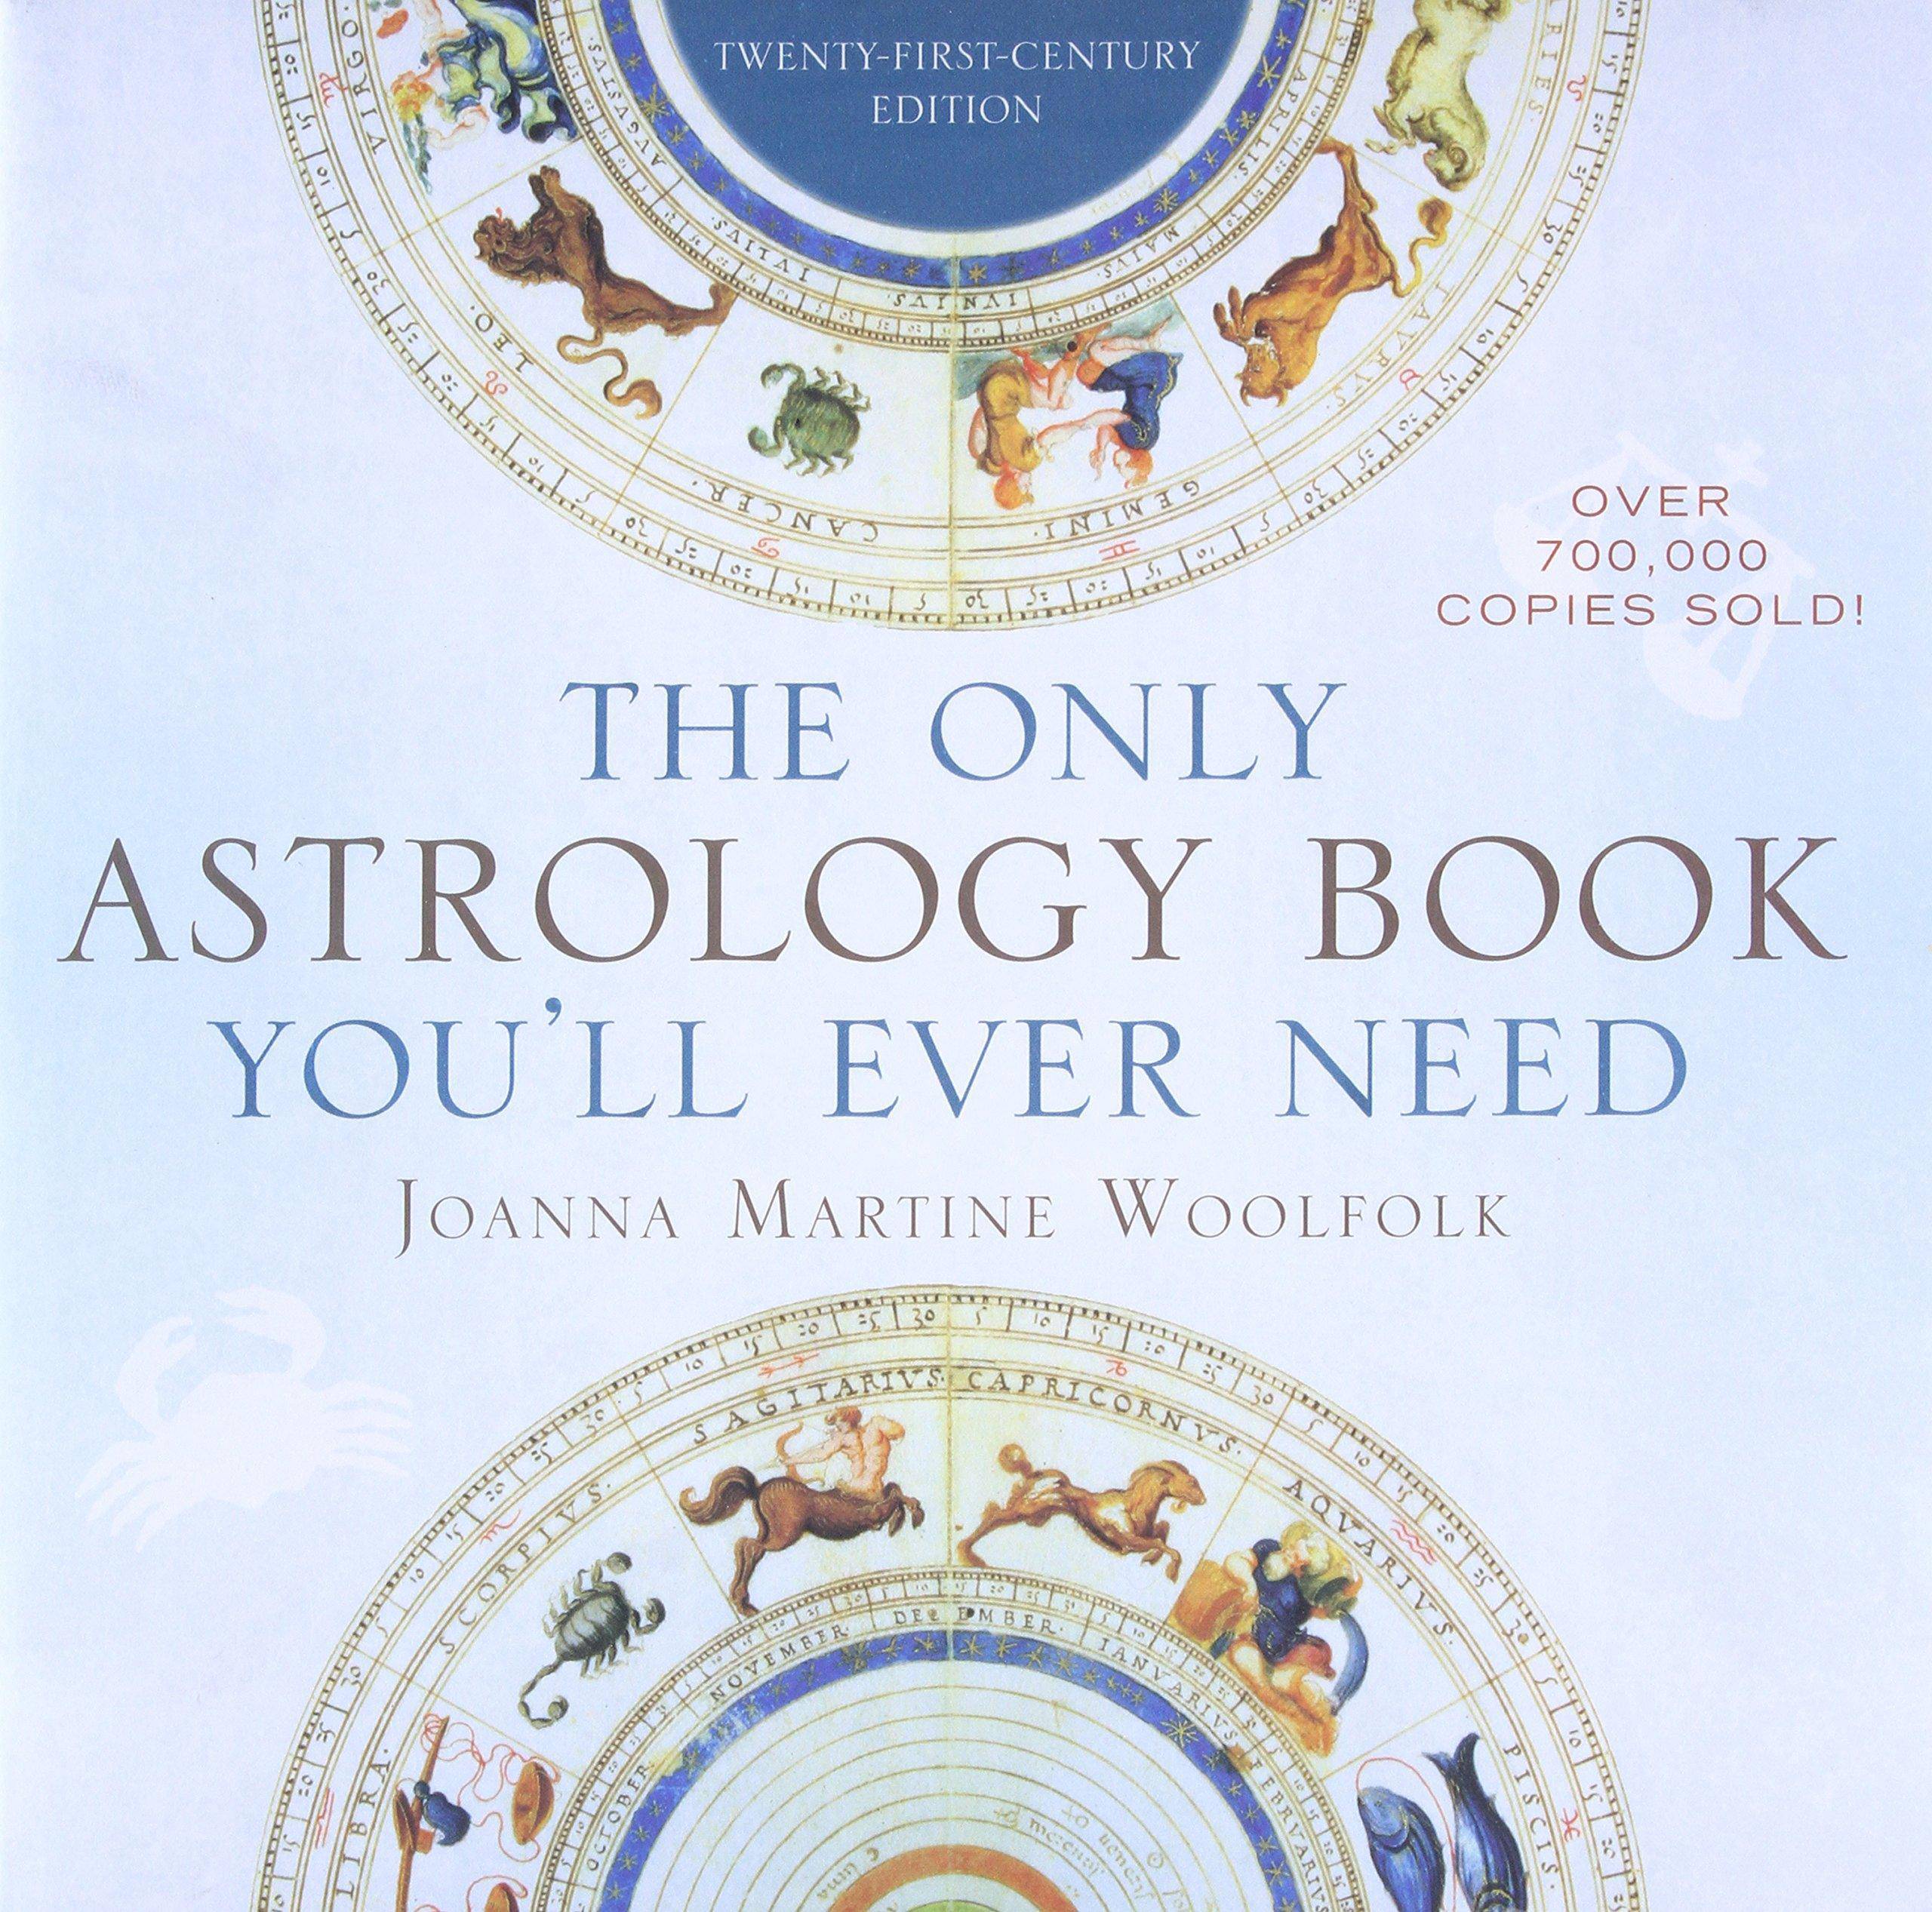 The Only Astrology Book You'll Ever Need - SureShot Books Publishing LLC